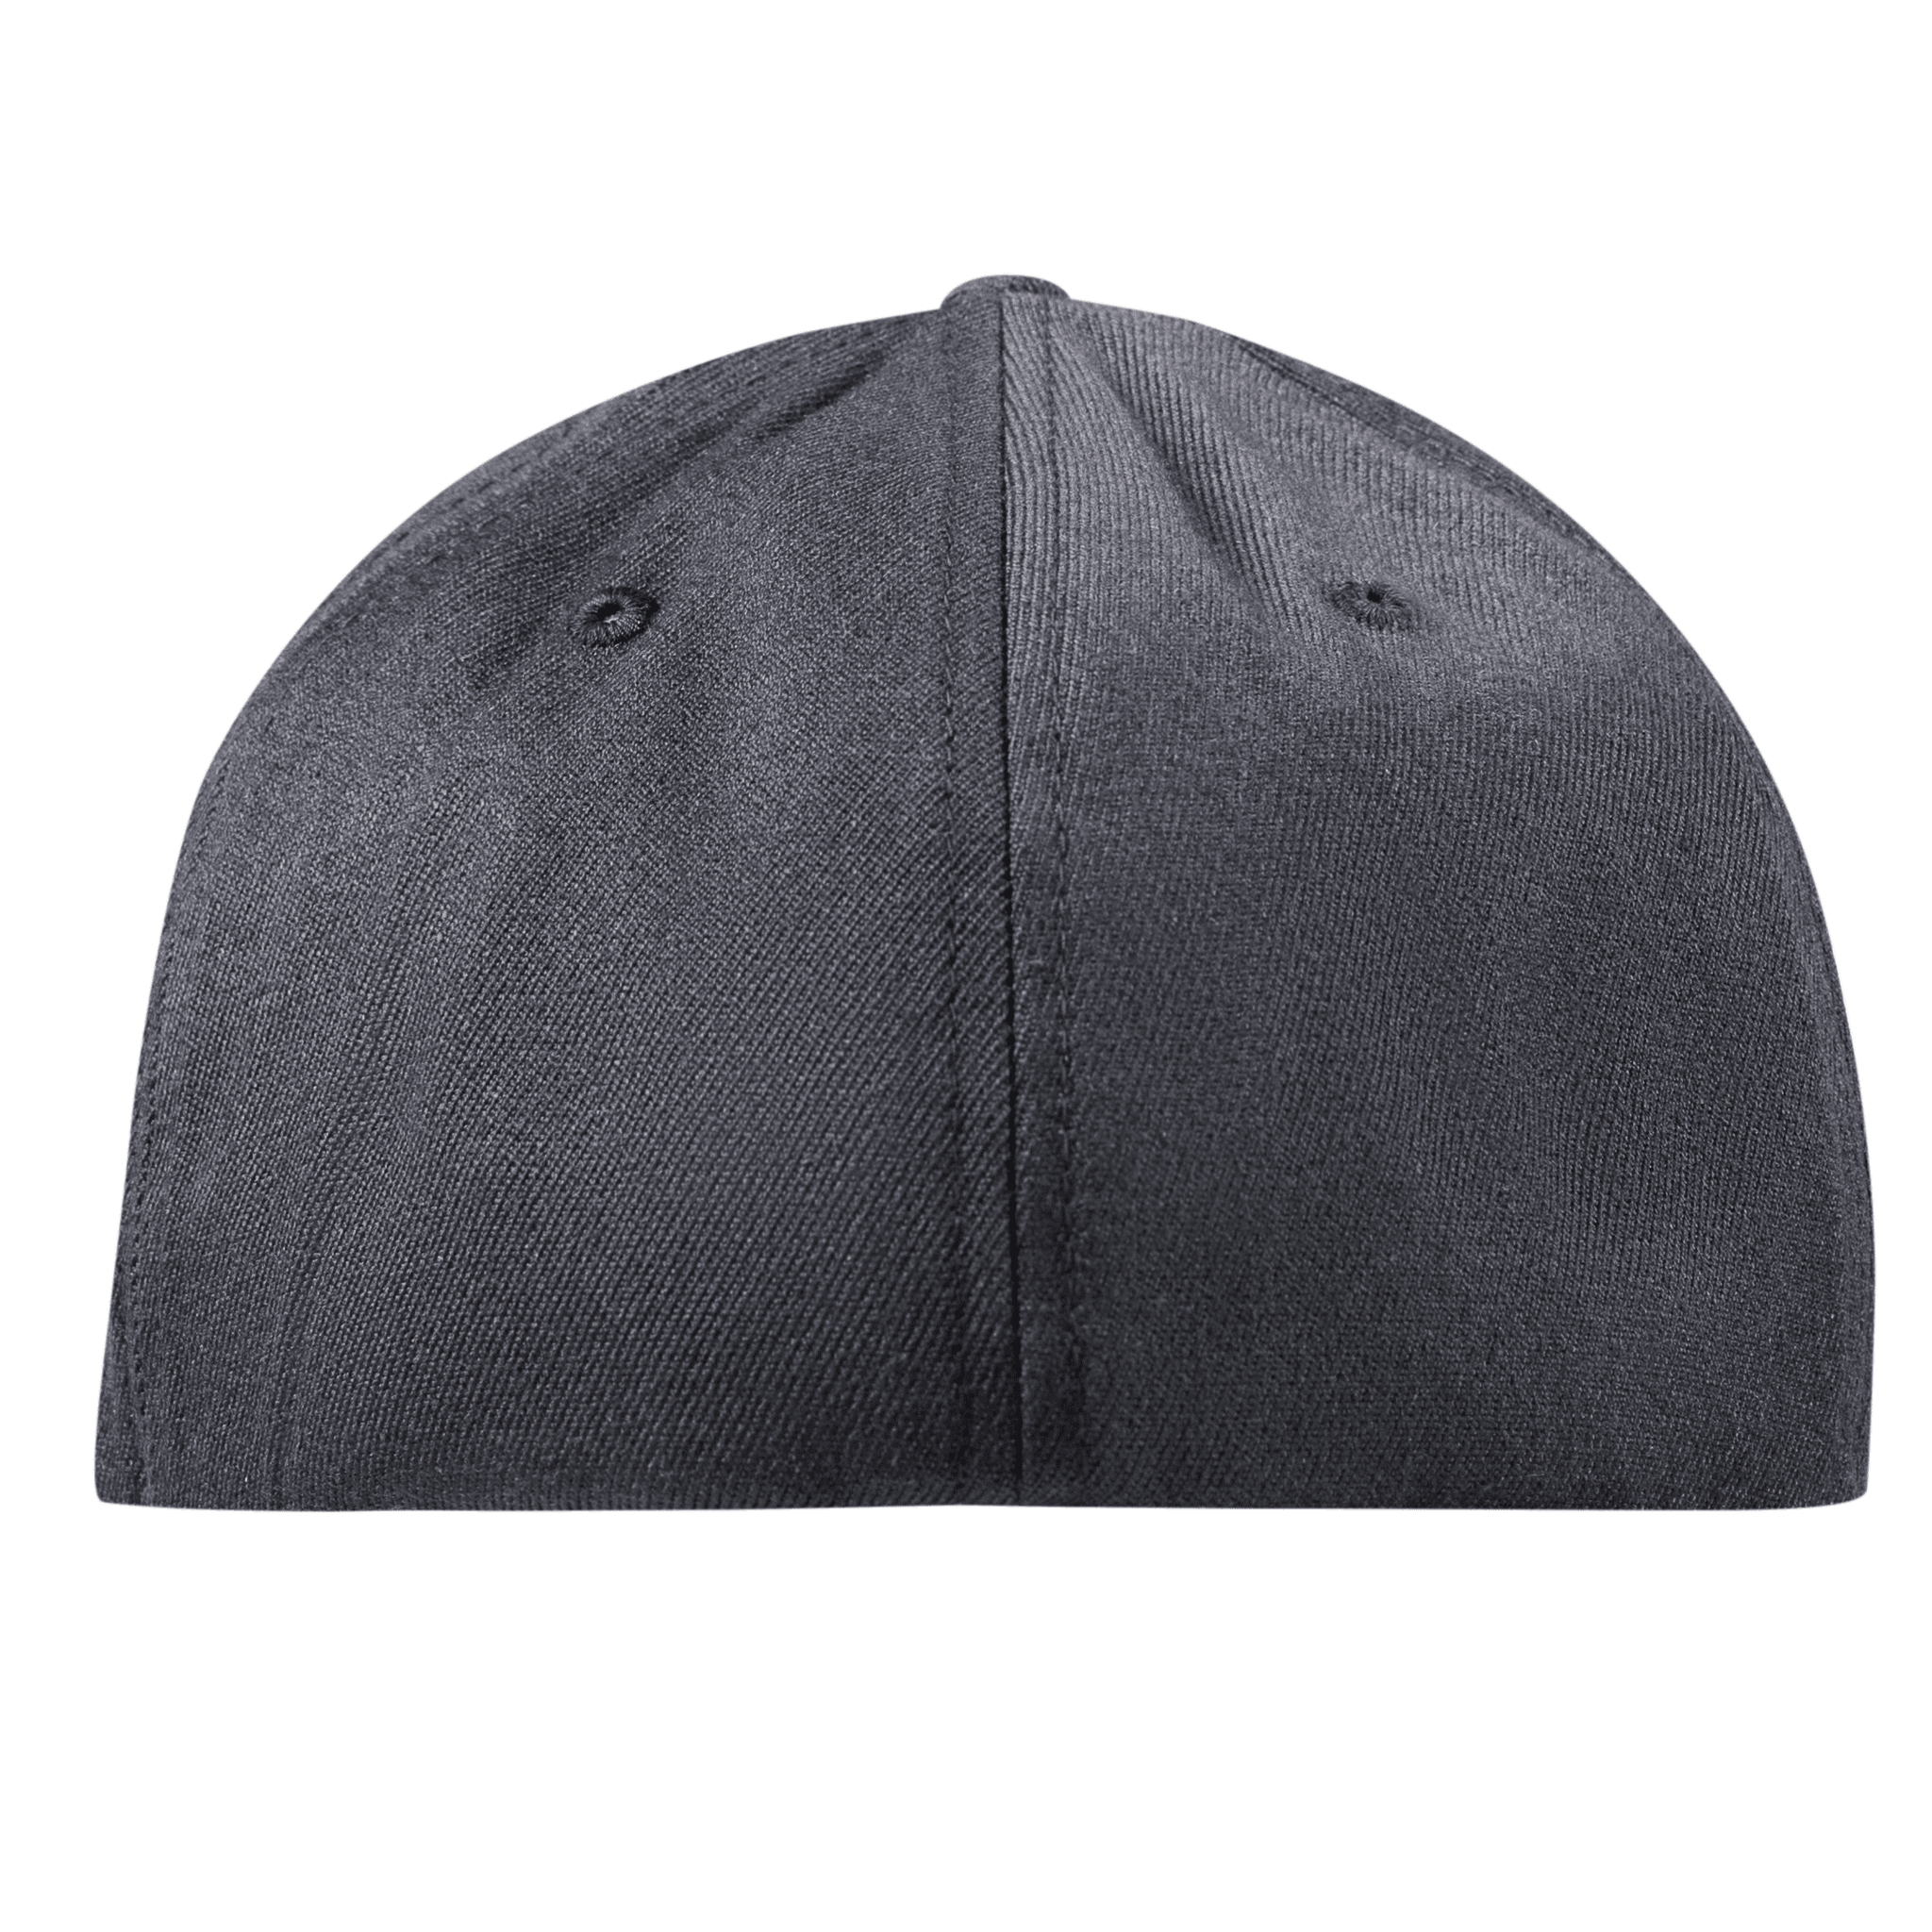 Michigan Vintage Flexfit Fitted Back Charcoal